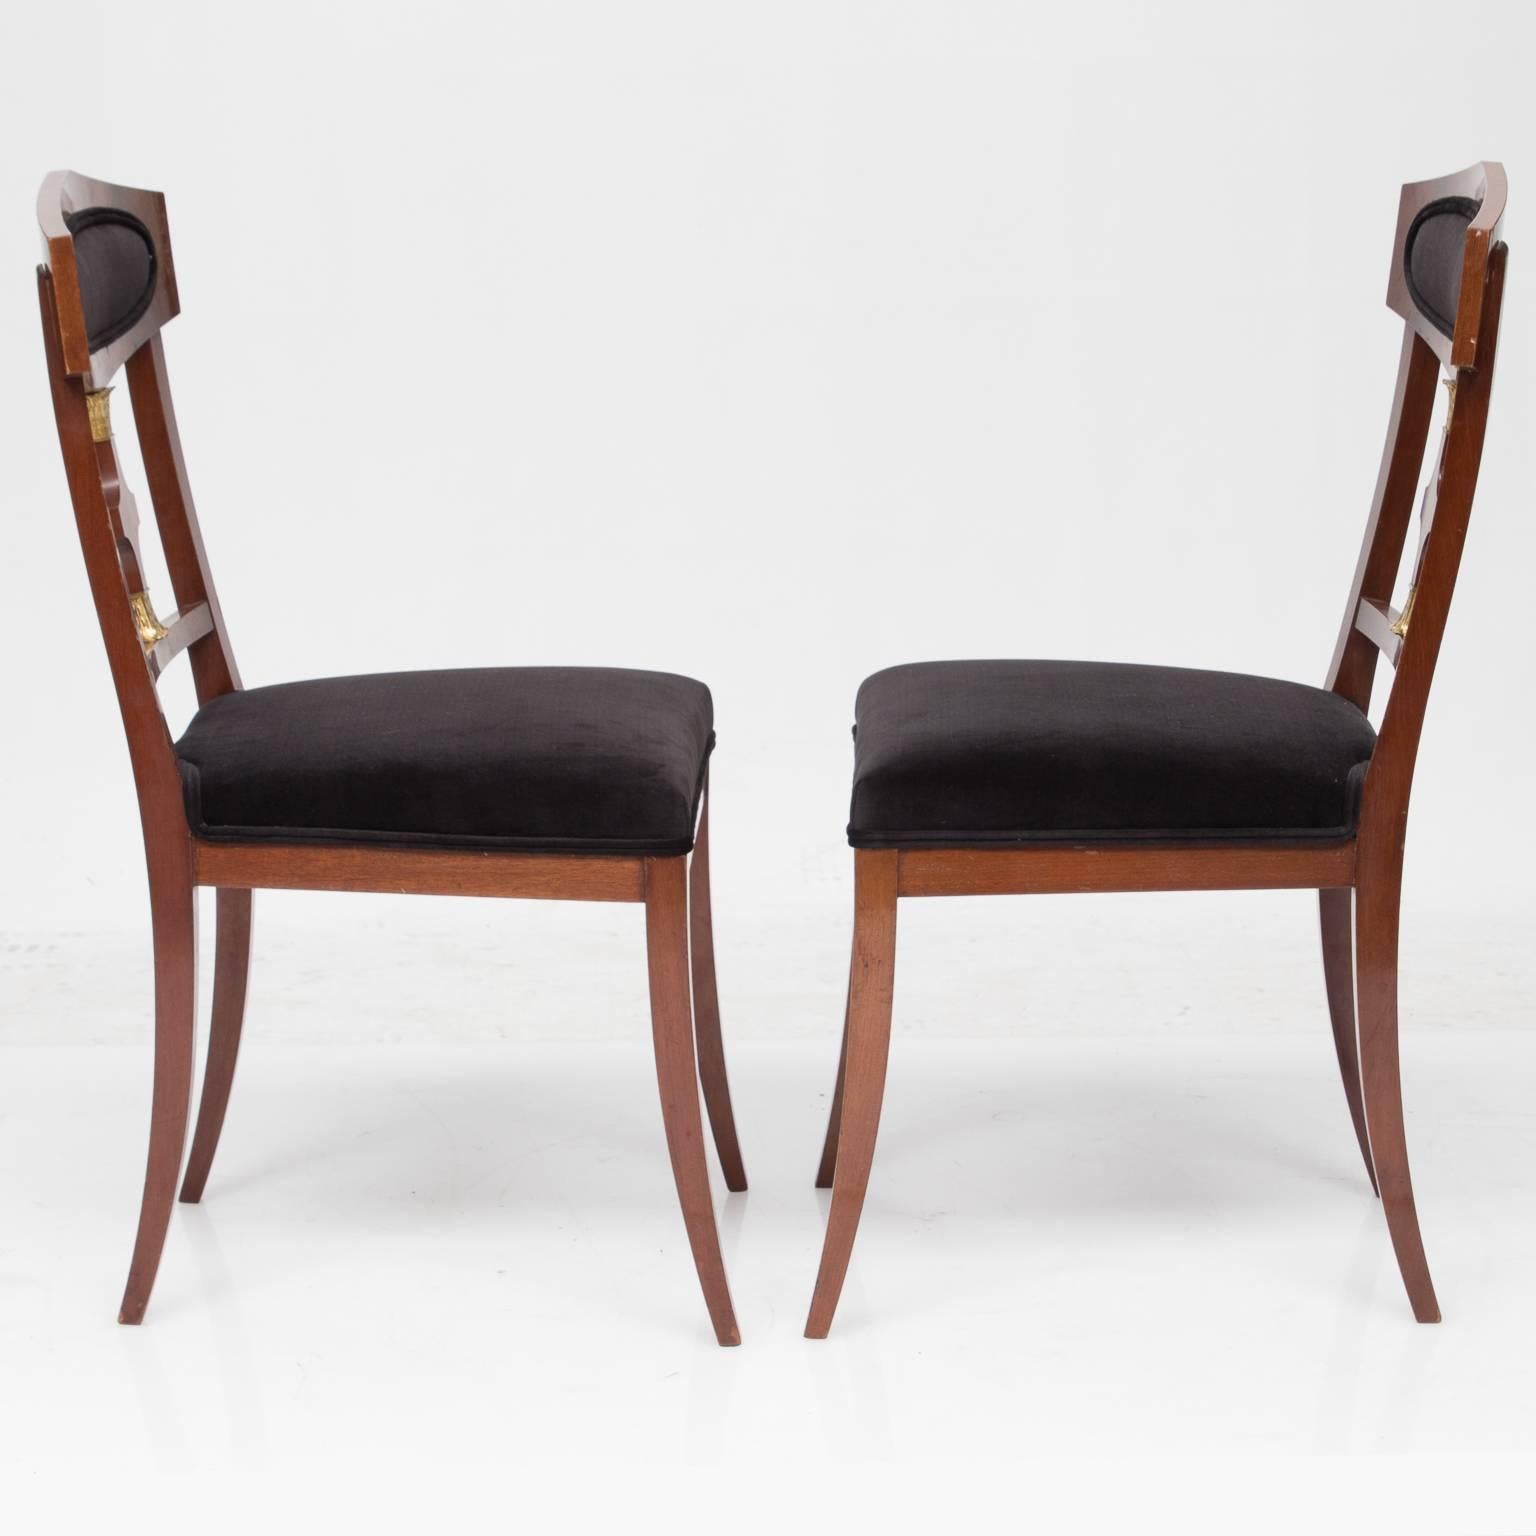 A fine pair of Swedish Empire style occasional chairs, very decorative space fillers. Beautifully flamed mahogany backs centered with an oval chocolate brown Ralph Lauren velvet. A distinctive splat with two metal capital caps. A matching fabric